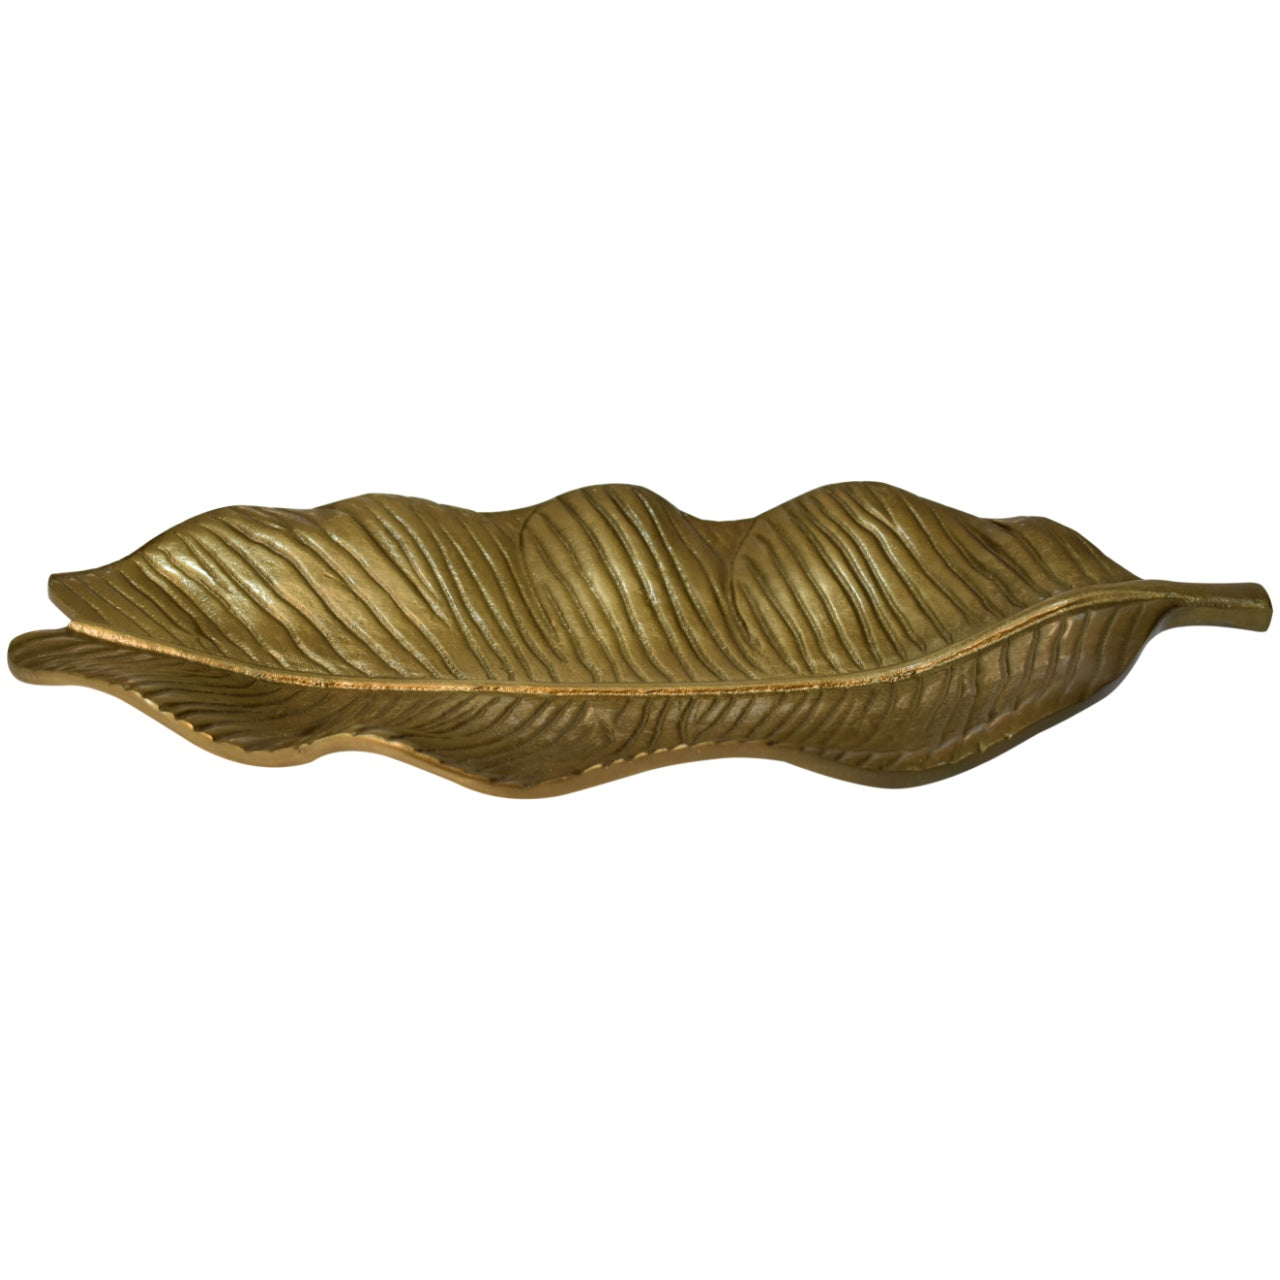 View Antique Banana Leaf Tray information